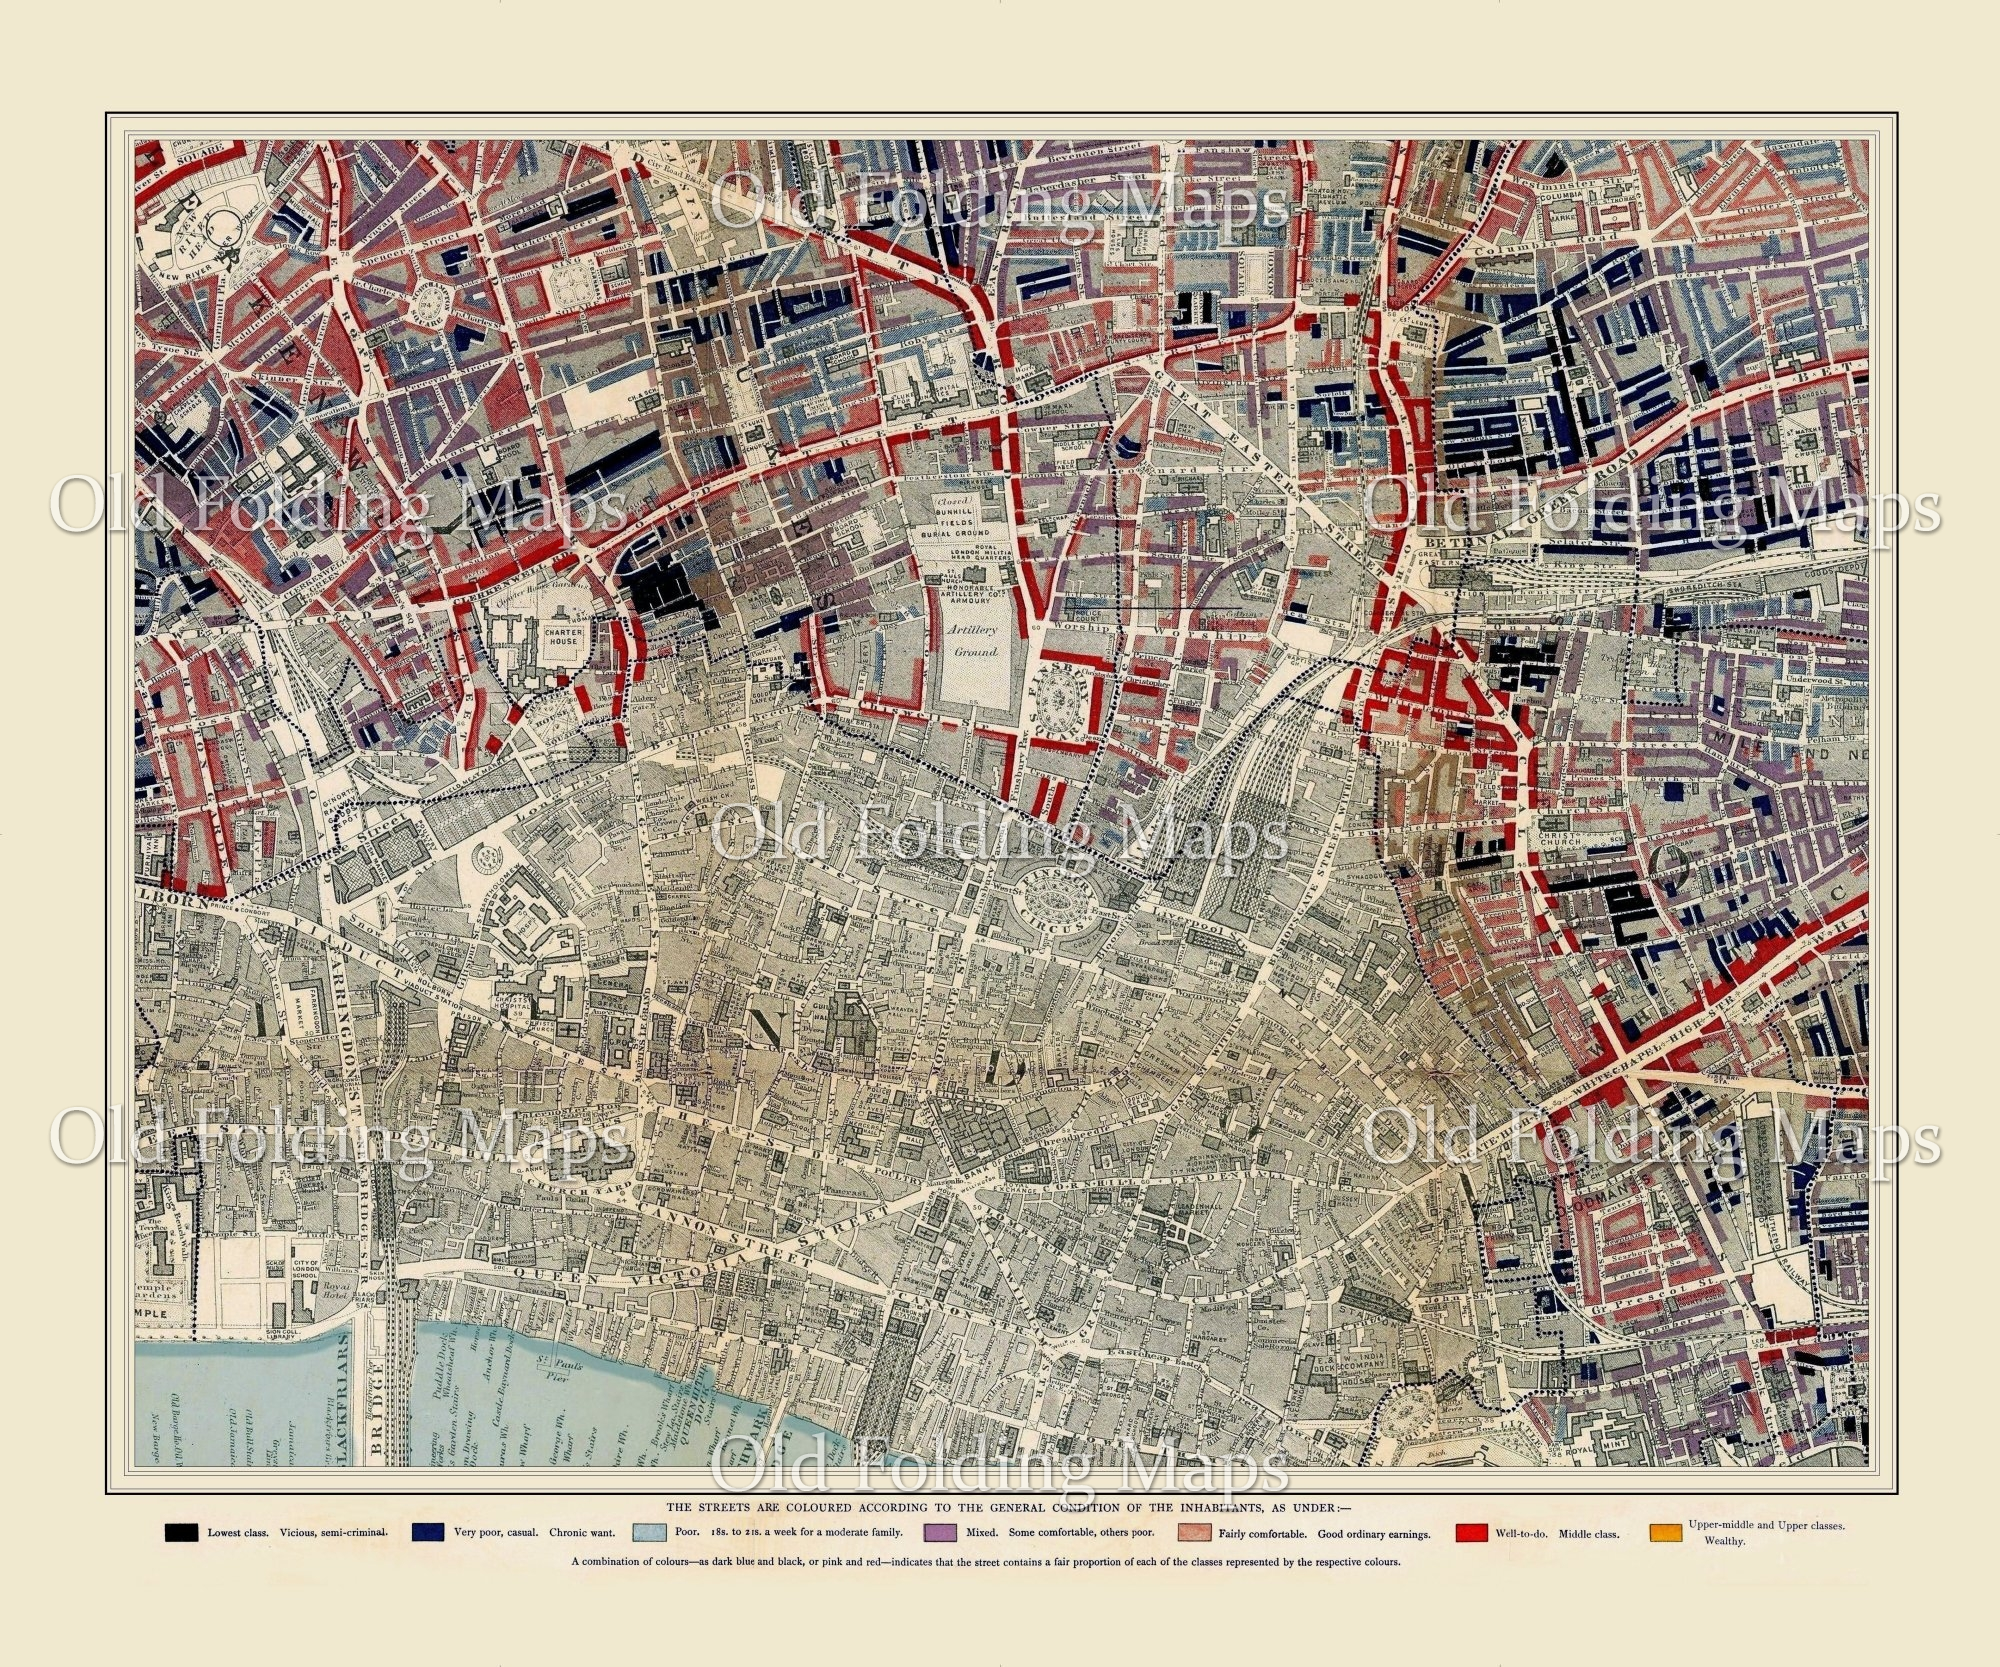 Booth's Map of London Poverty: Clerkenwell, Bethnal Green, Spitalfields circa 1889 reproduction map laid on cloth in slipcase